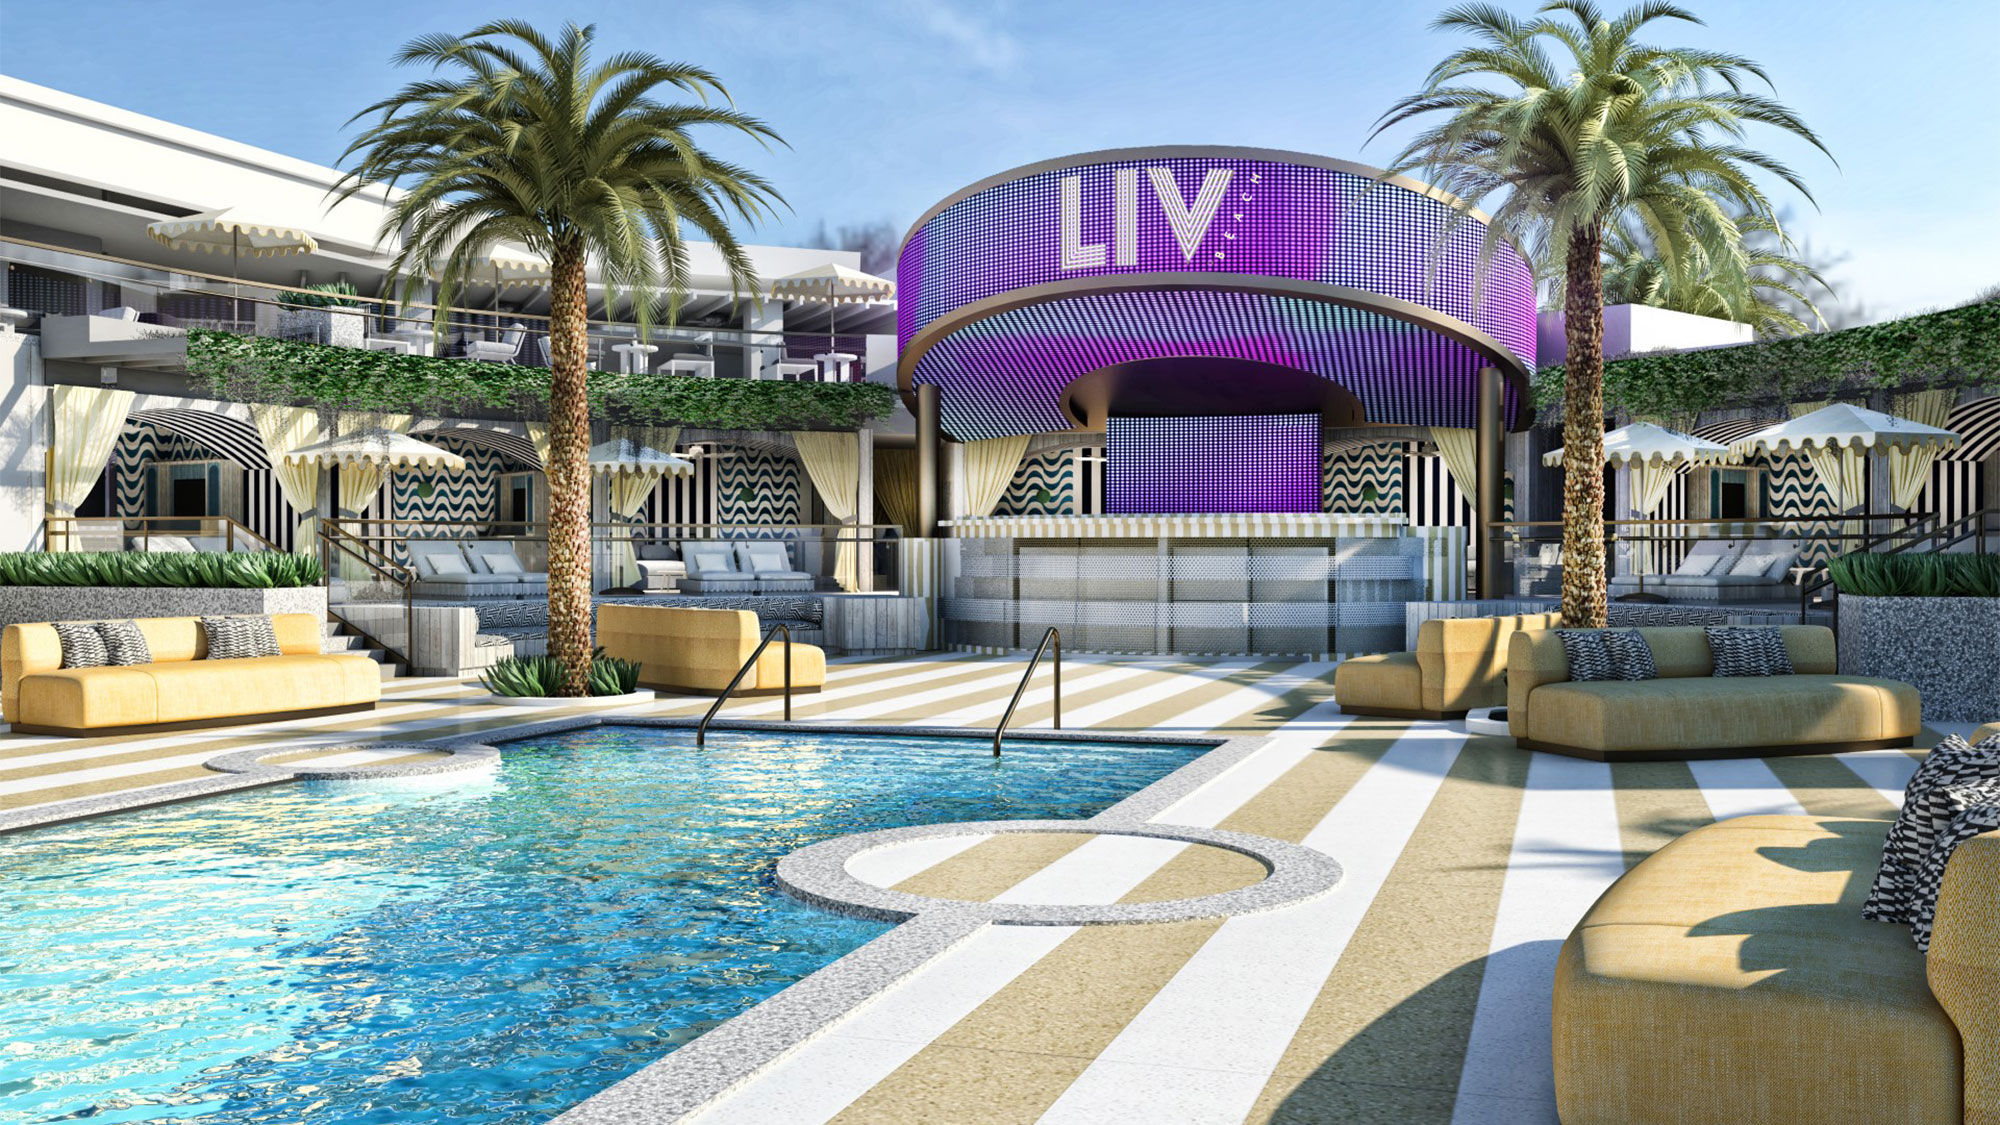 A rendering of  LIV Beach, to open next spring at Fontainebleau Las Vegas.